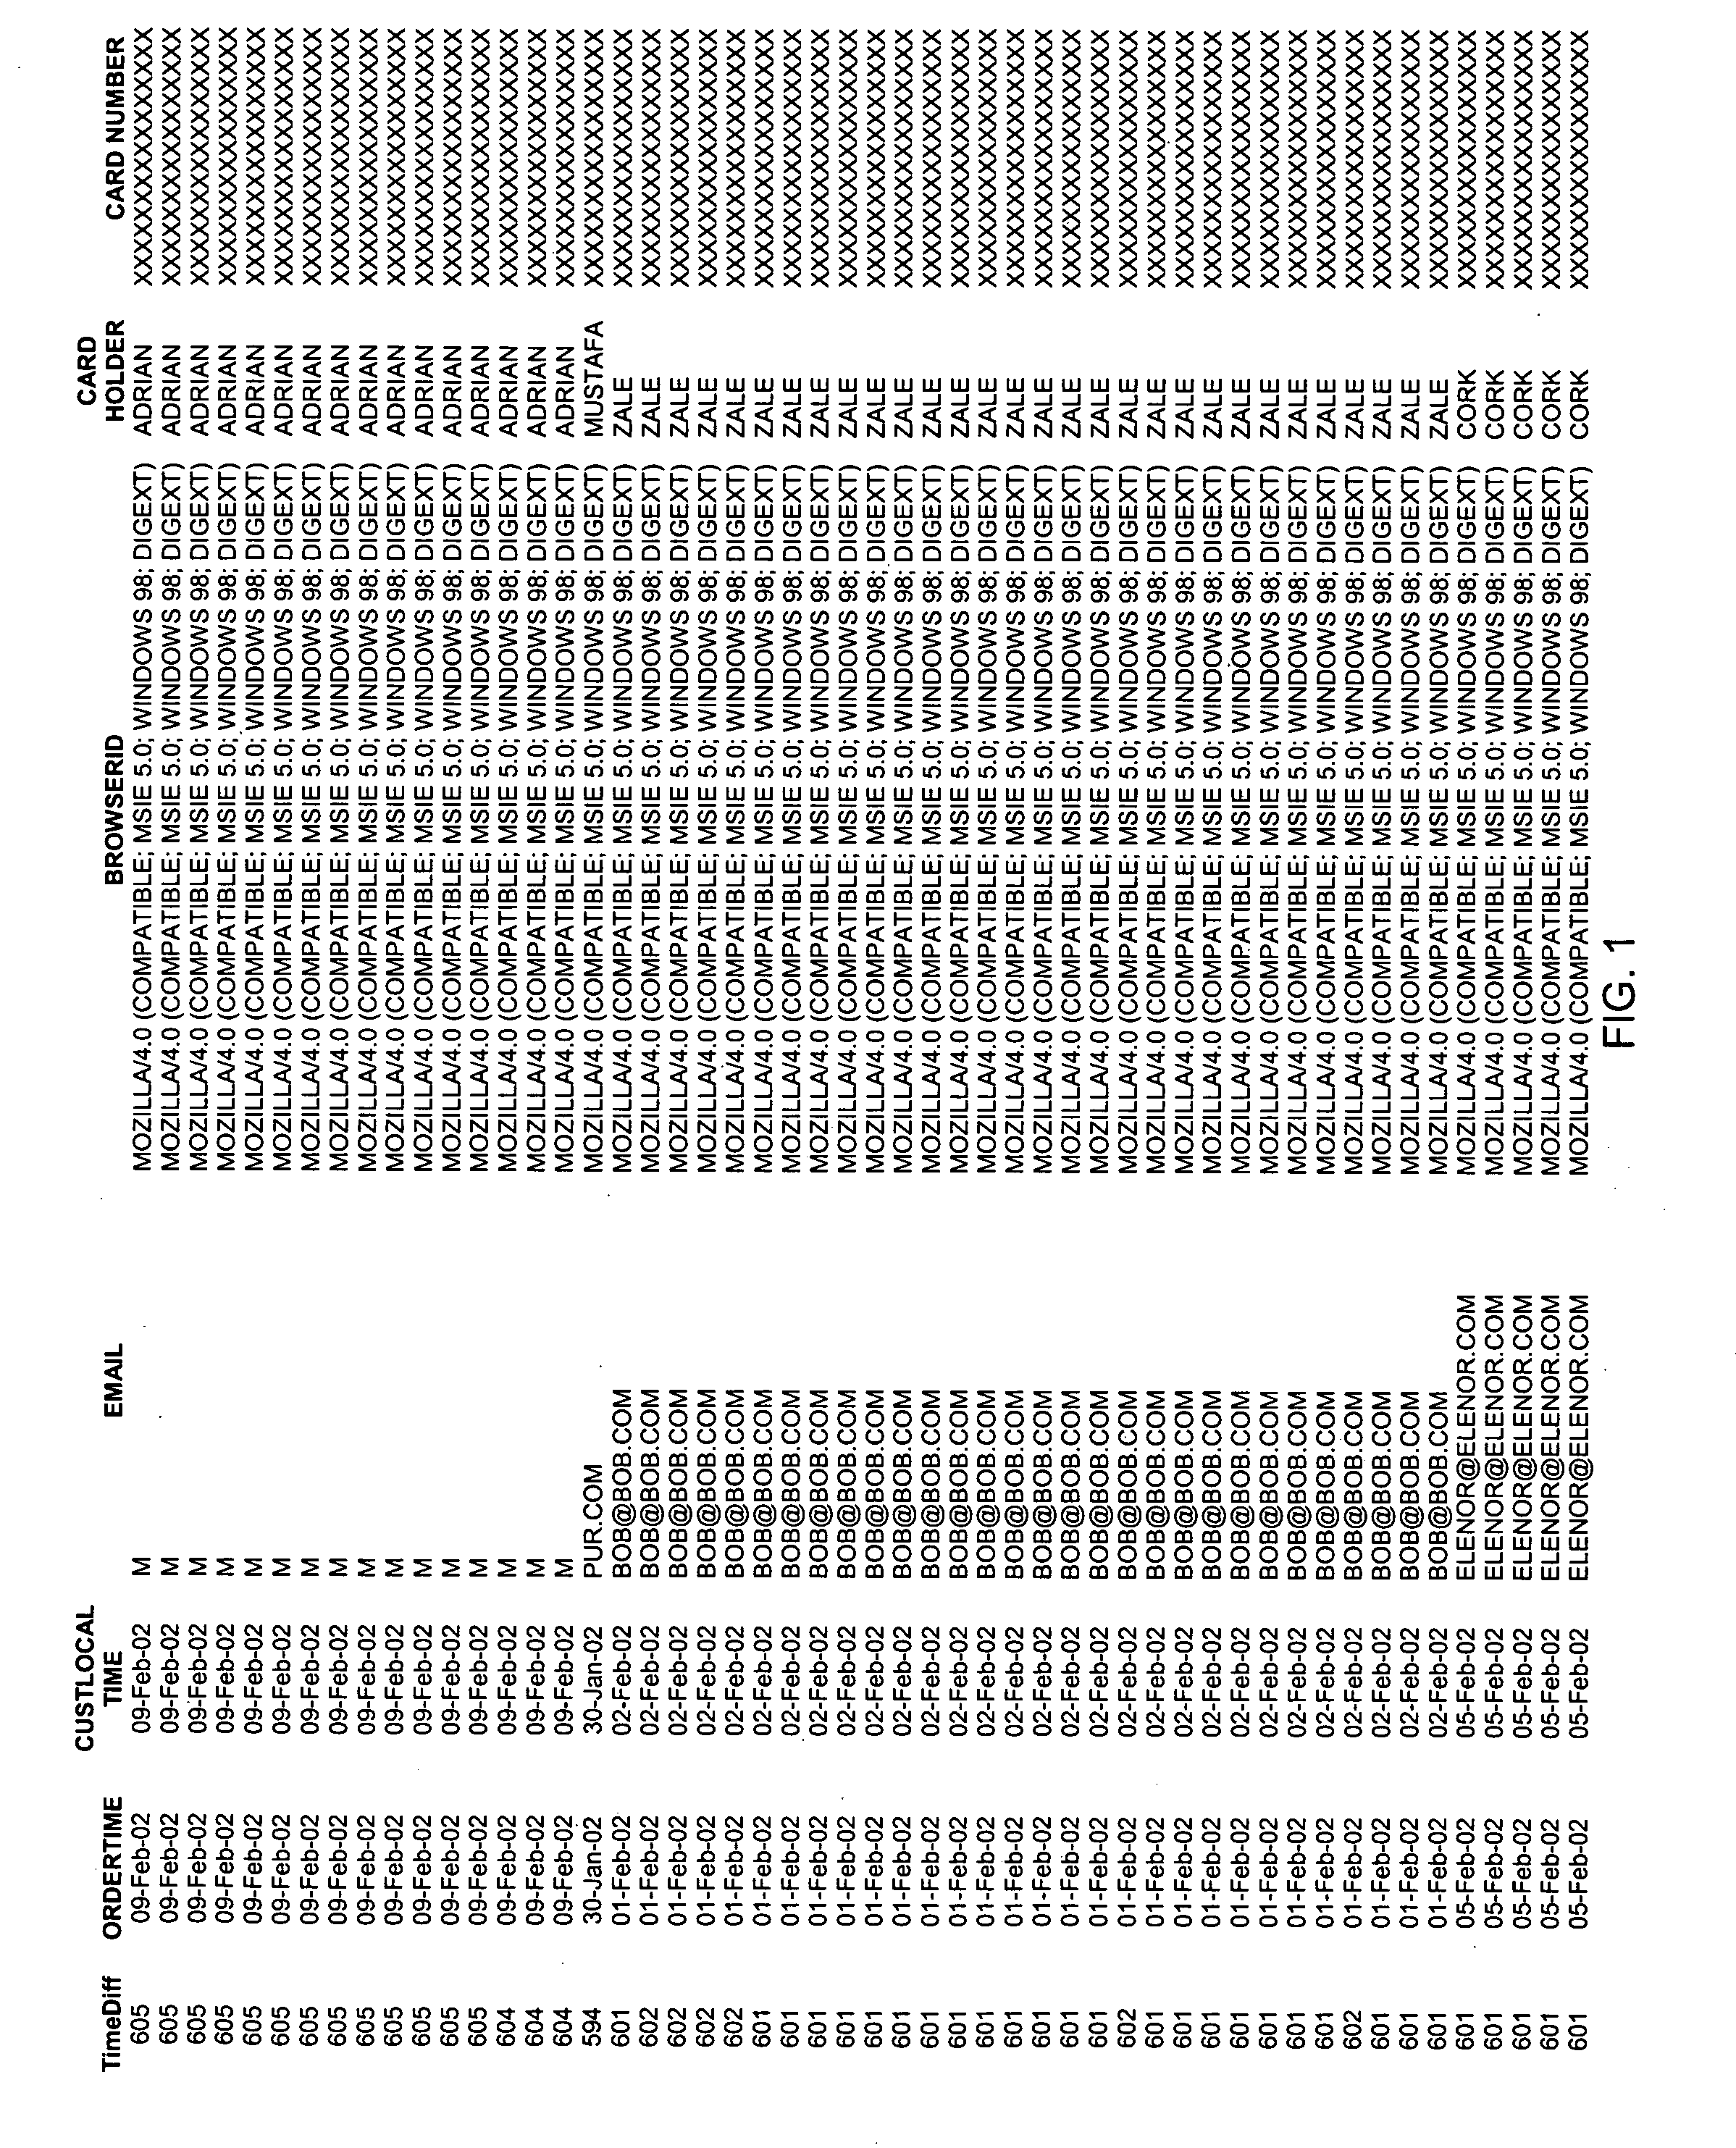 Method and system for identifying users and detecting fraud by use of the internet